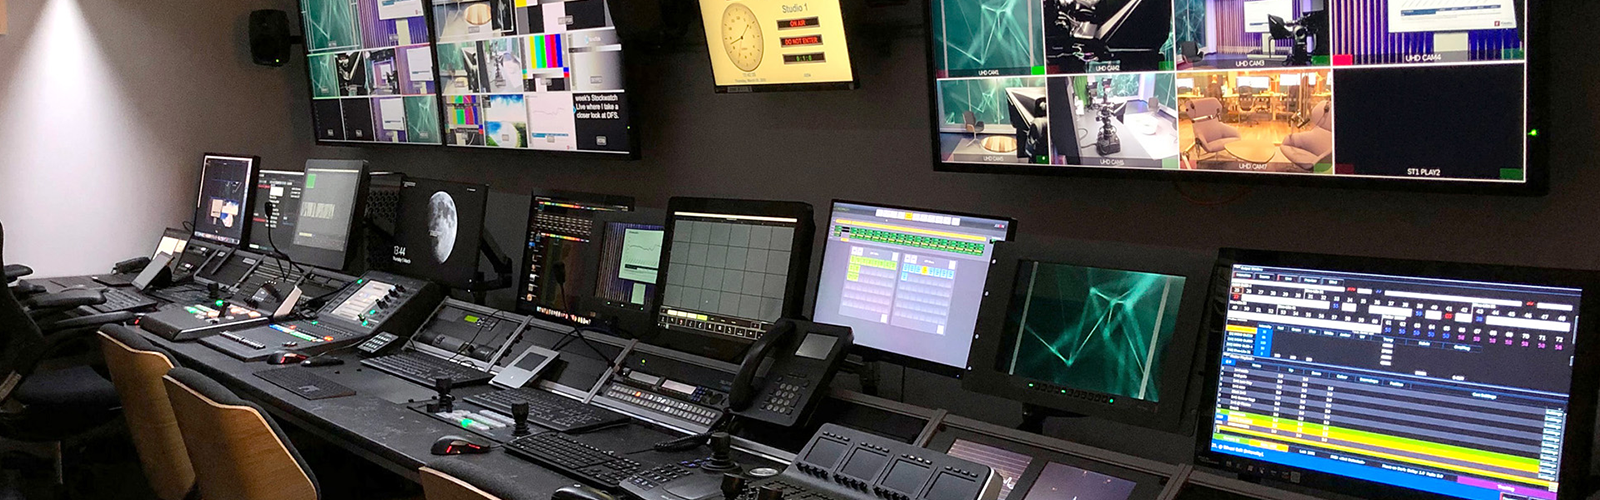 ATG Danmon announces the completion of a television production system for the Singapore branch of a US-based financial services corporation tkt1957.com